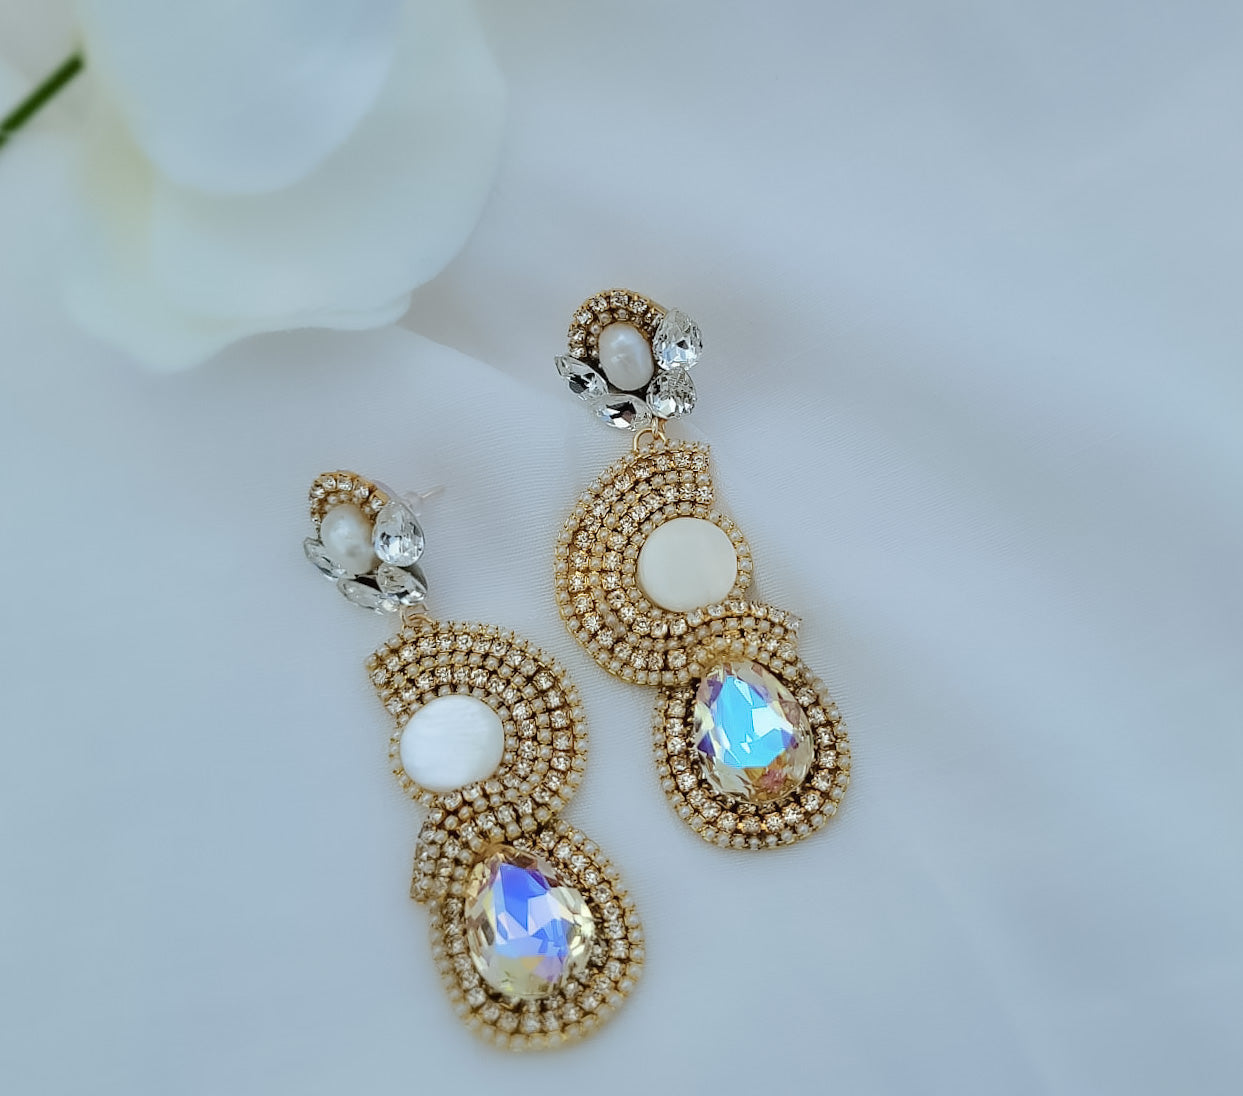 K Bride Earrings - Designed with Pearls and Crystals for a Special Occasion